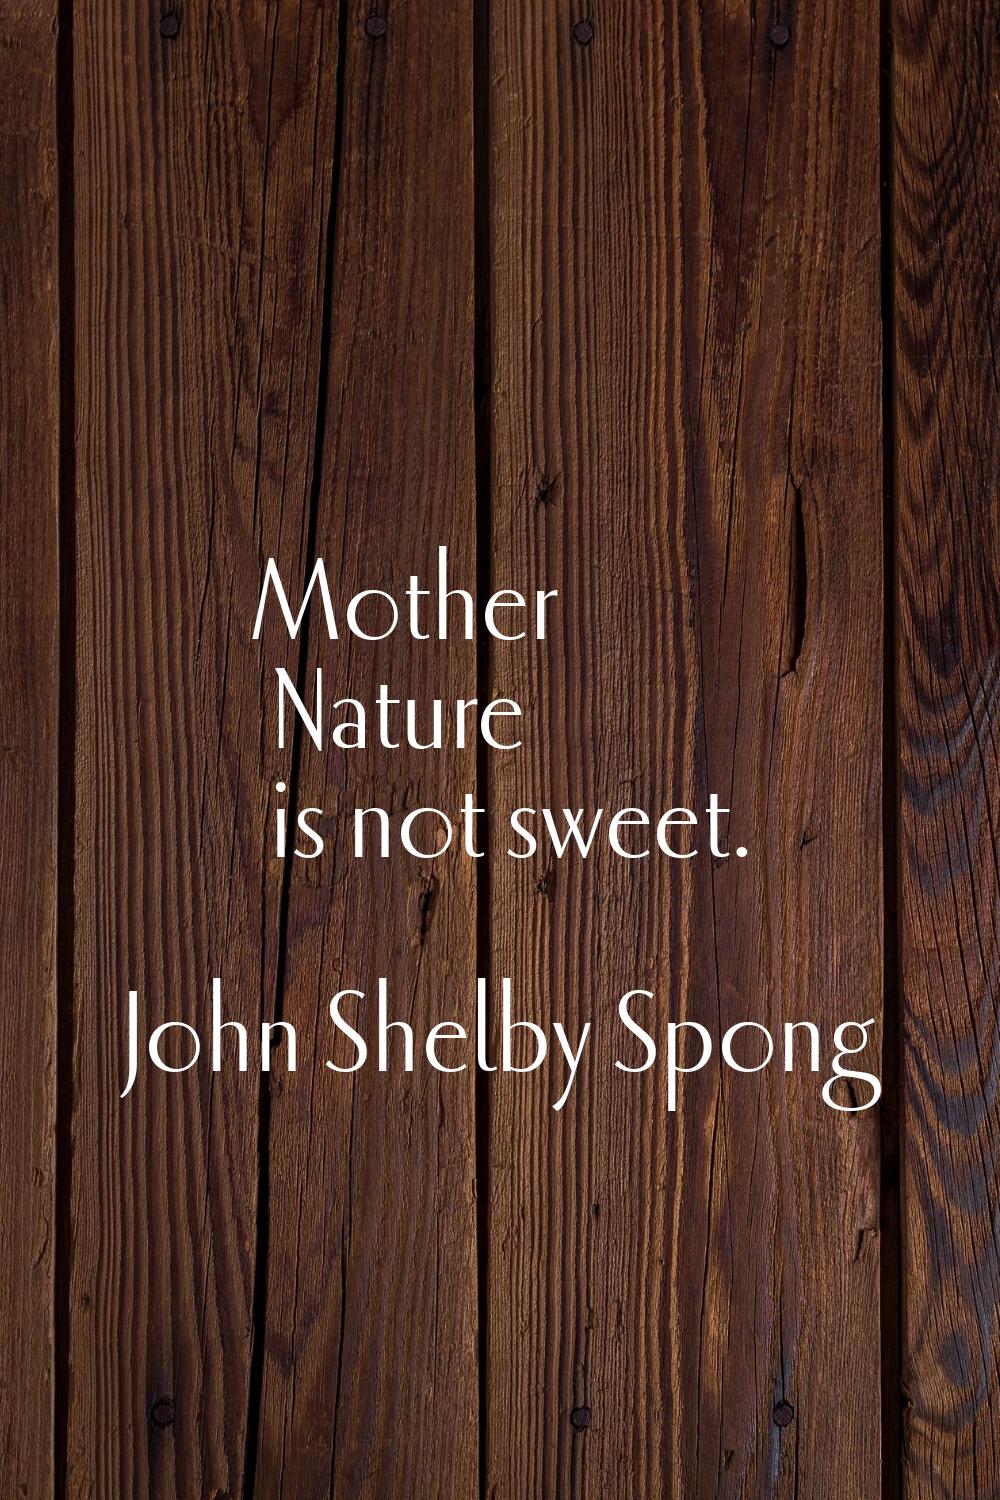 Mother Nature is not sweet.